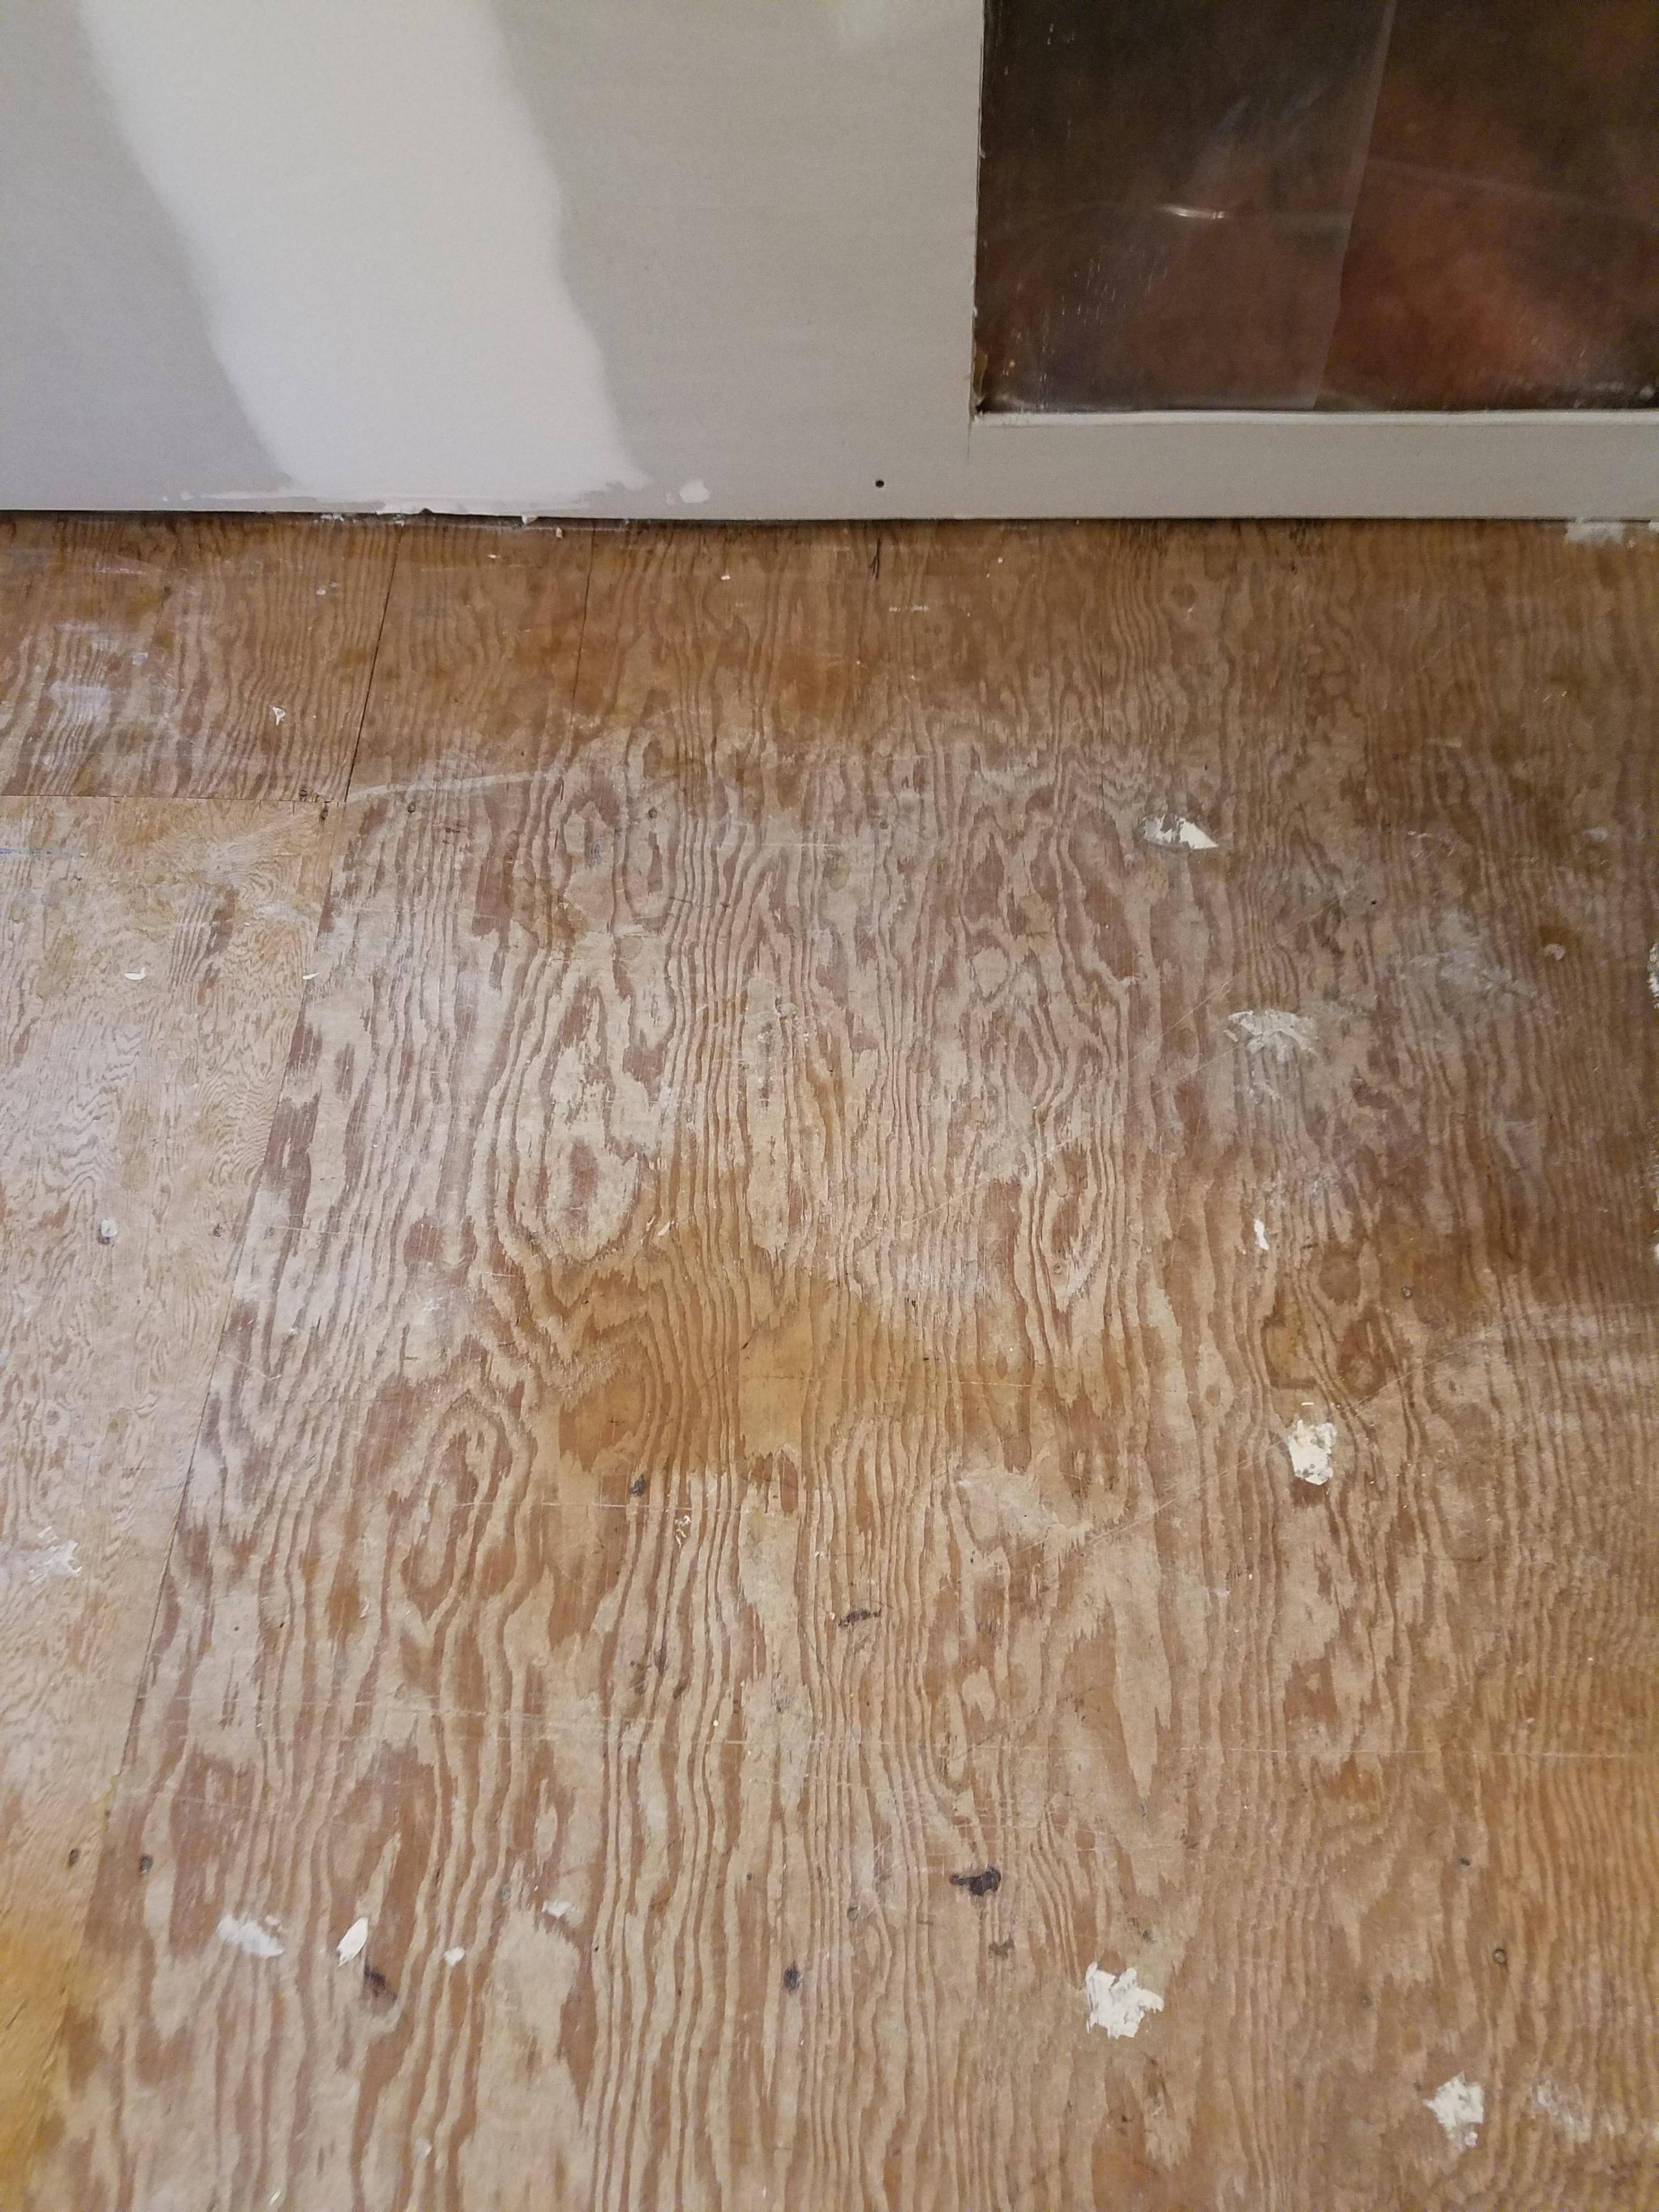 How Do You Clean Plywood Floors?